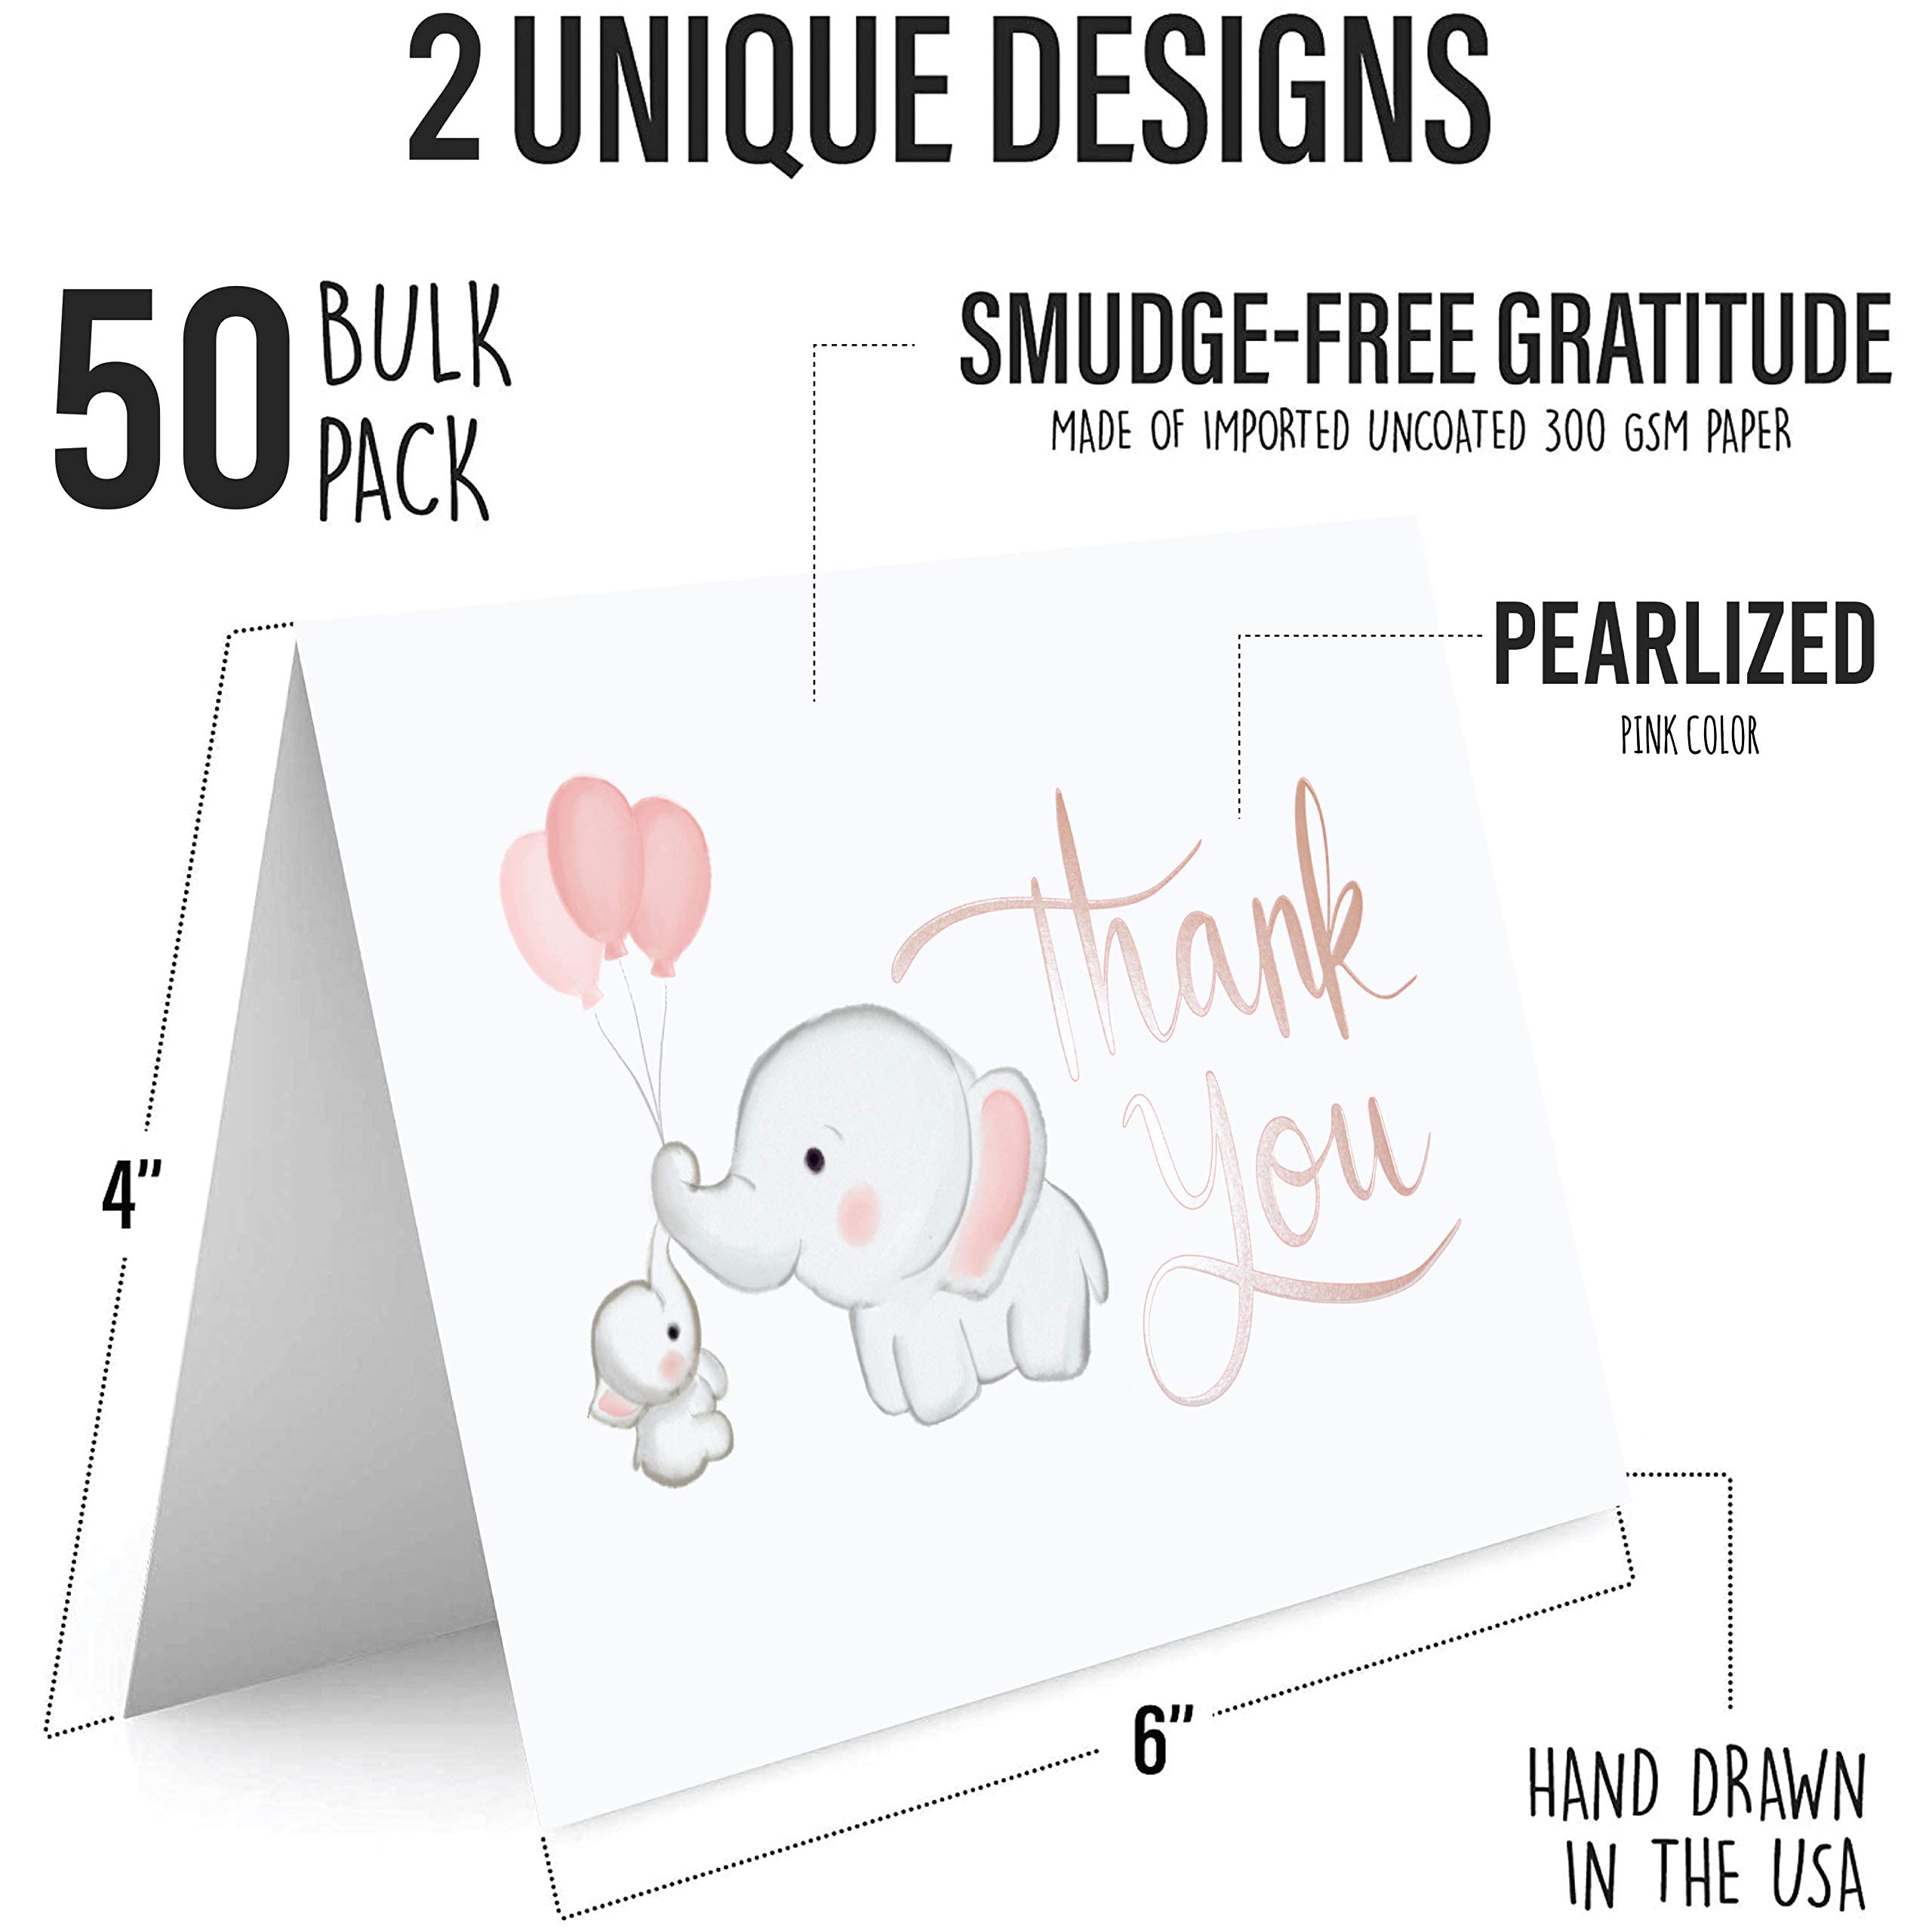 Baby Shower Thank You Cards with Envelopes for Girl. 50 Elephant Pink Thank You Cards Baby Shower with Envelopes for Baby Thank You Notes - Blank Inside Baby Shower Card Pack with Sealing Stickers…